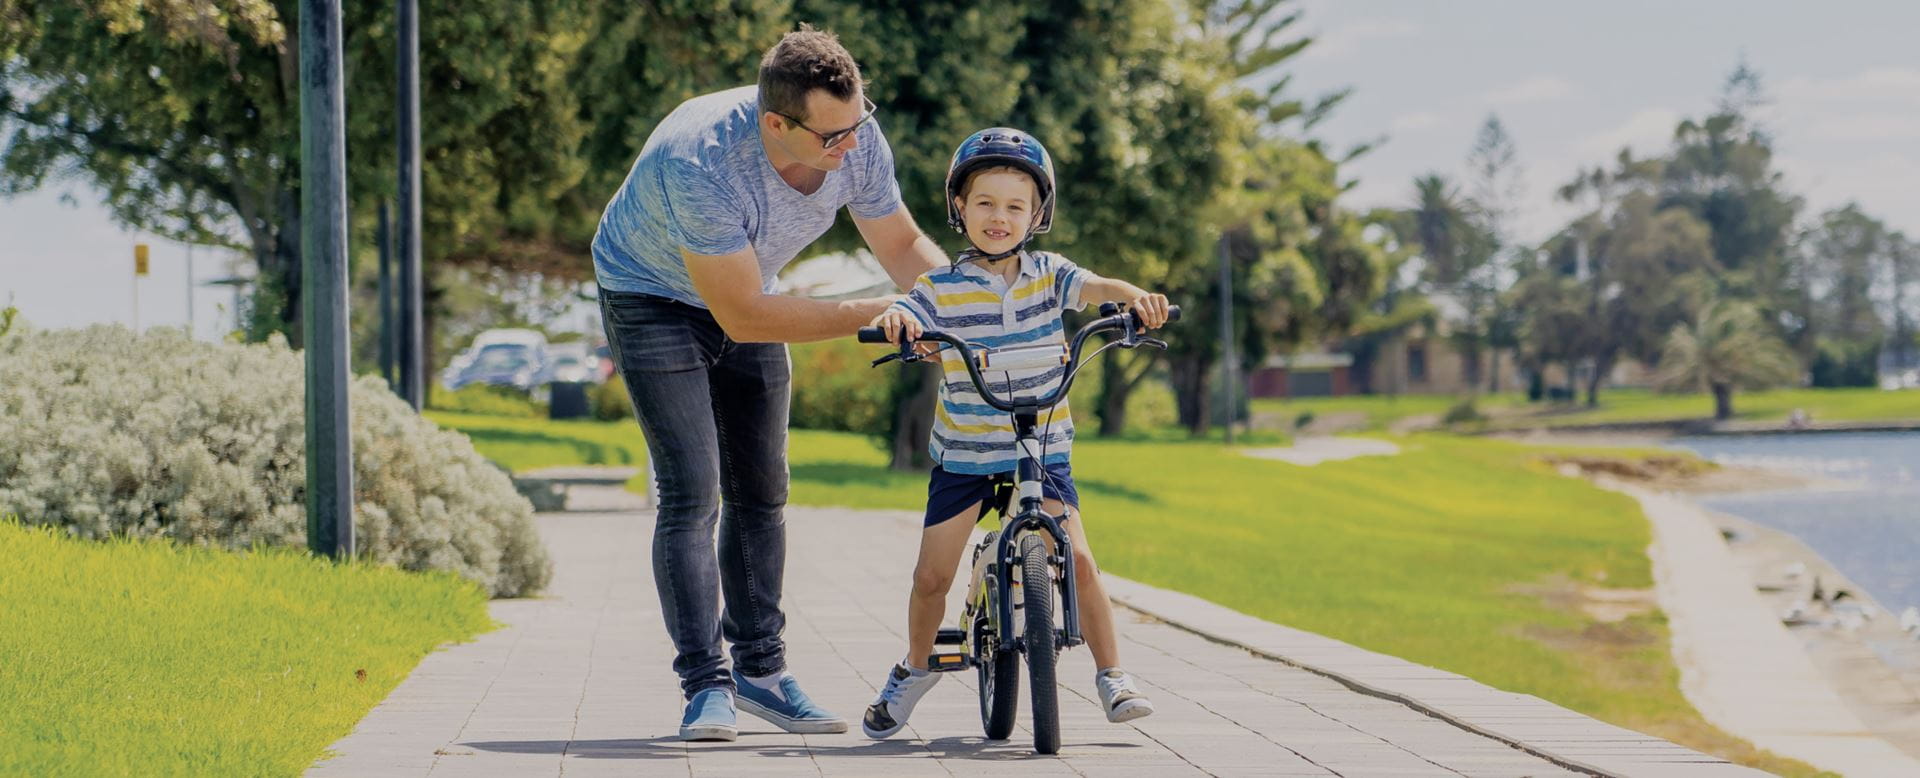 A father helping his son learn to ride a bike in a park